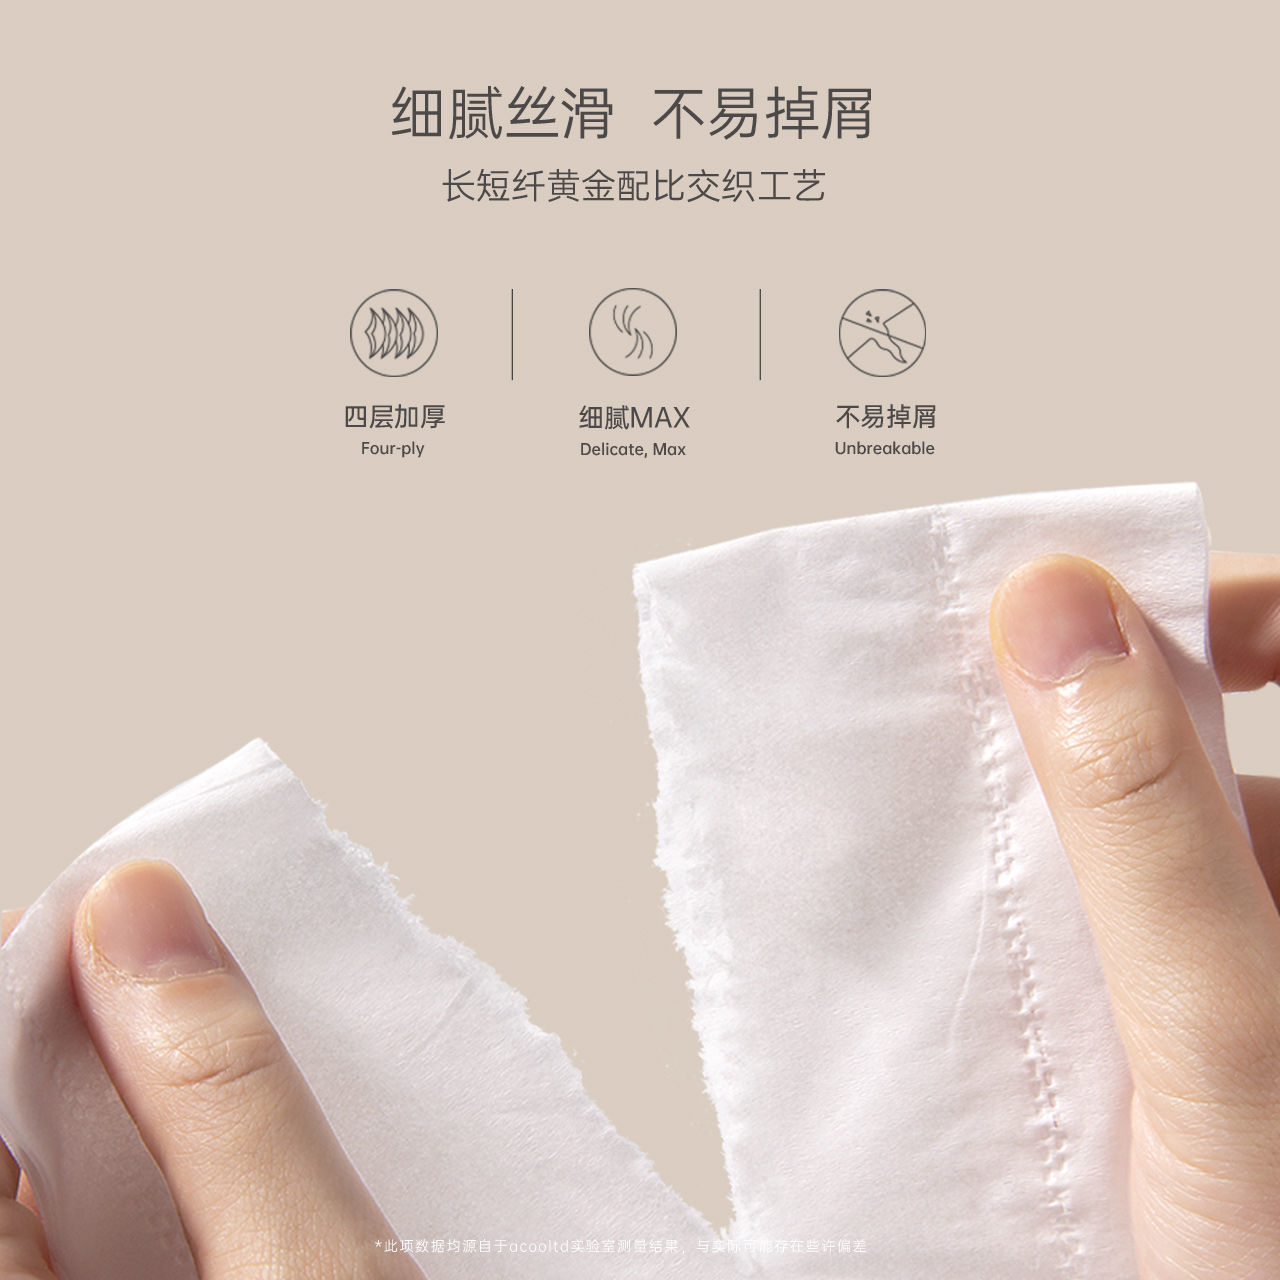 [60 Packs for Stocking up for One Year] Log Tissue Whole Box Wholesale Toilet Paper Napkin Household Face Towel 1 Pack